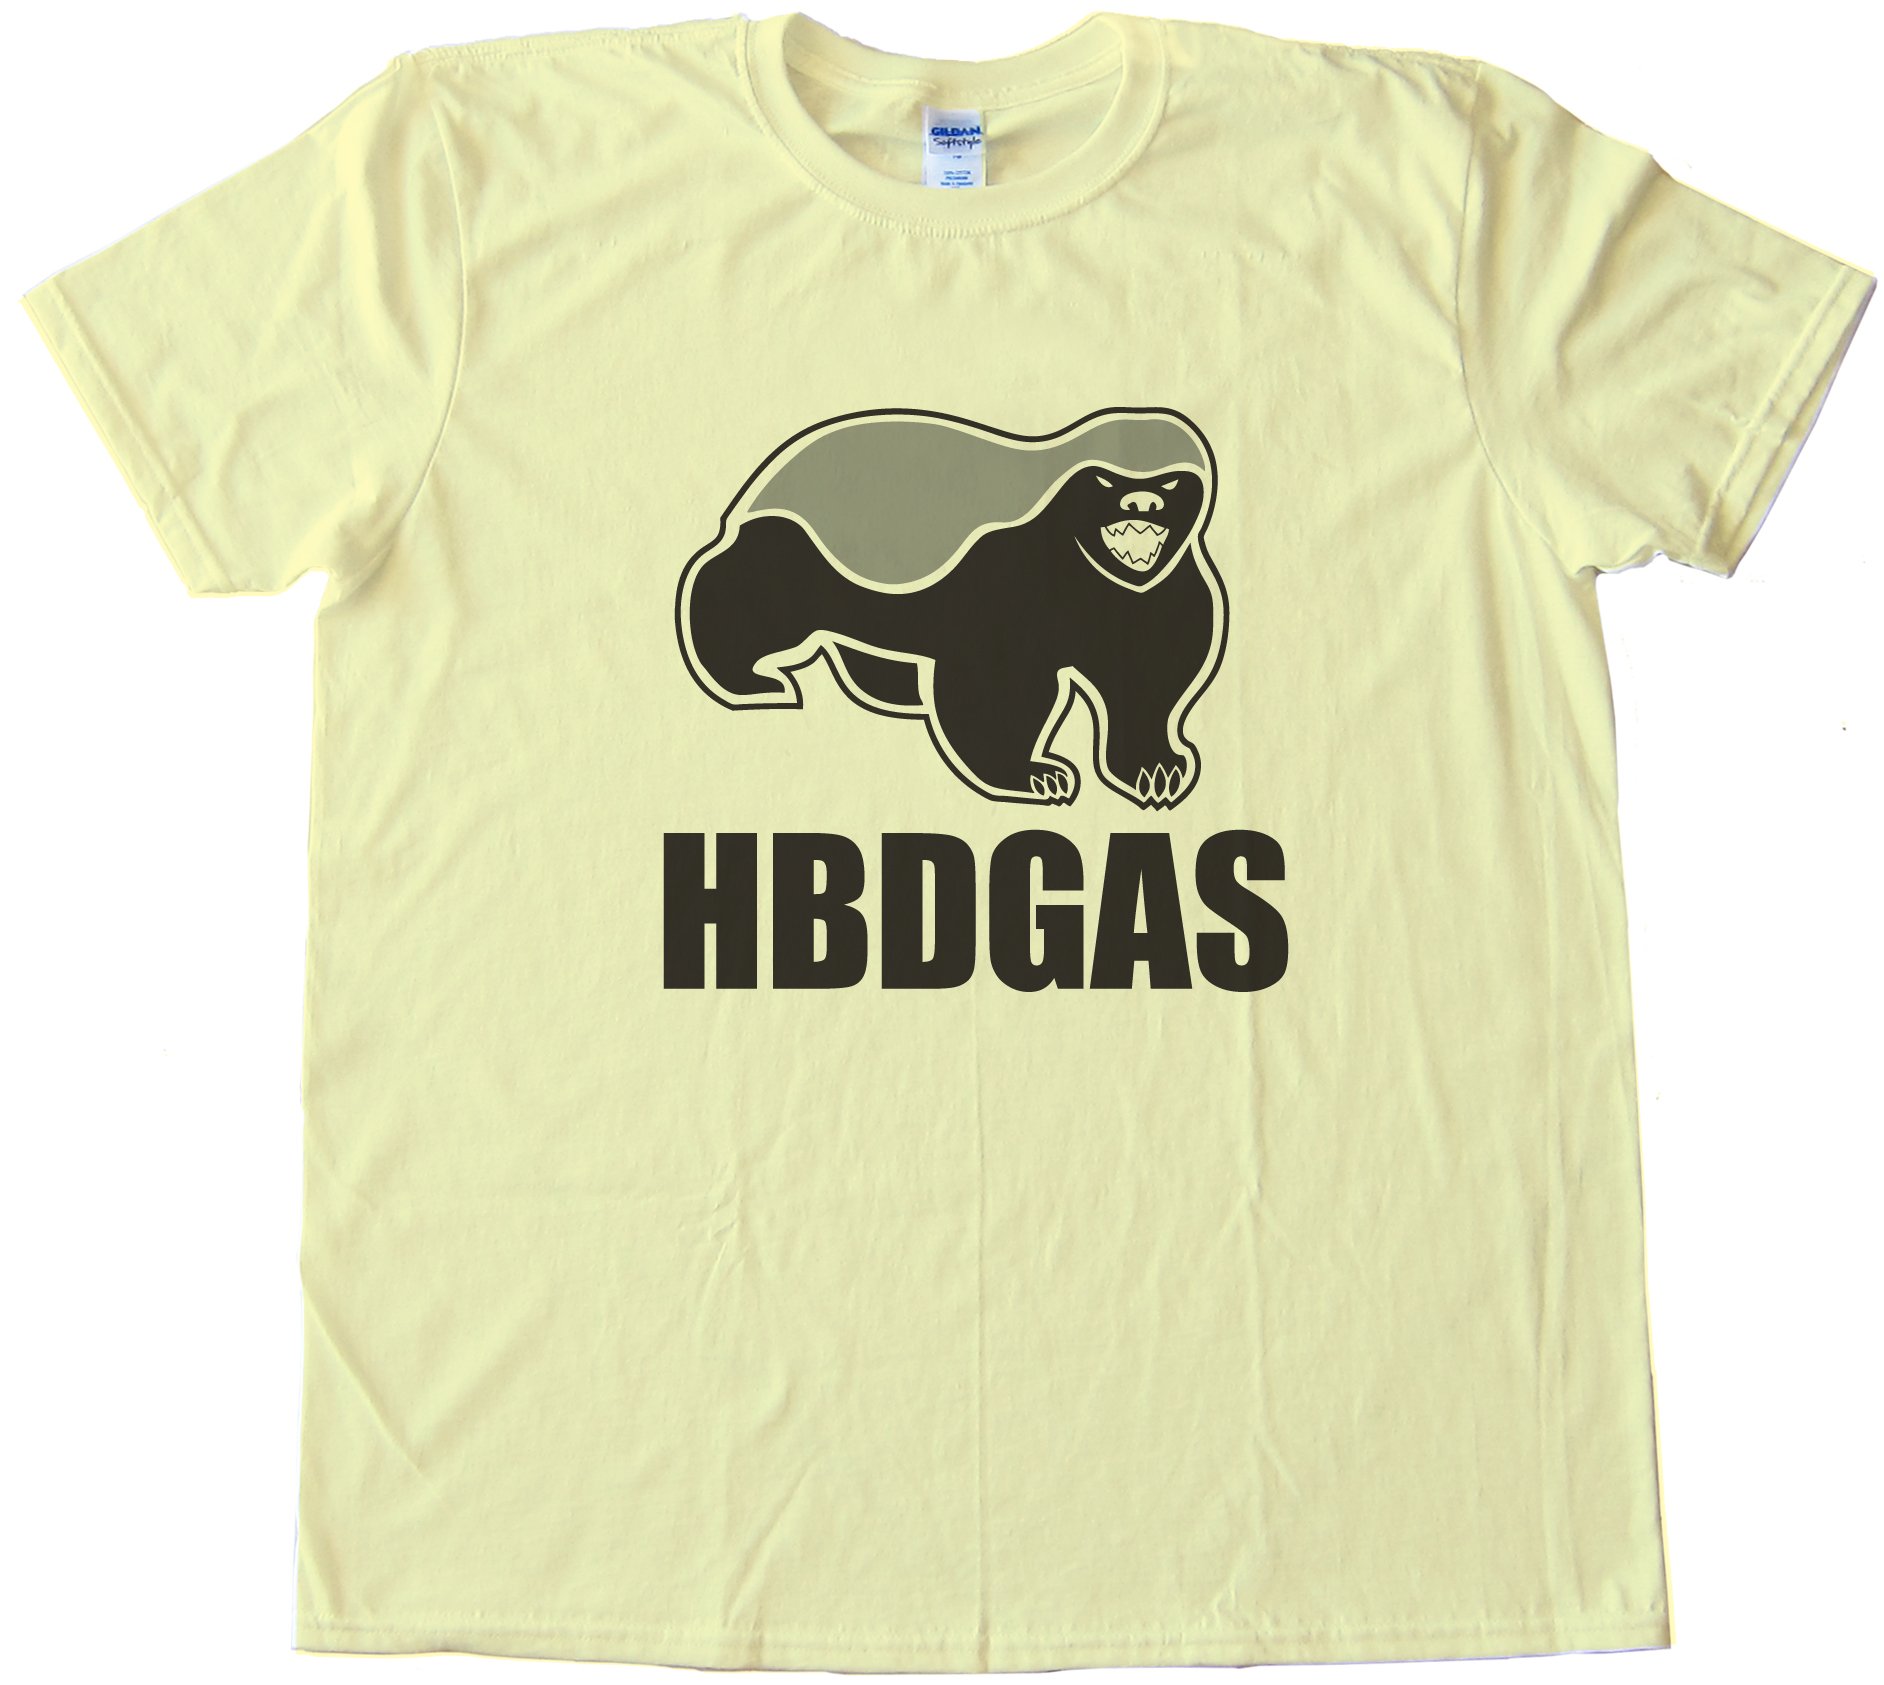 Hbdgas Honey Badger Don'T Give A S$&Amp;! Tee Shirt